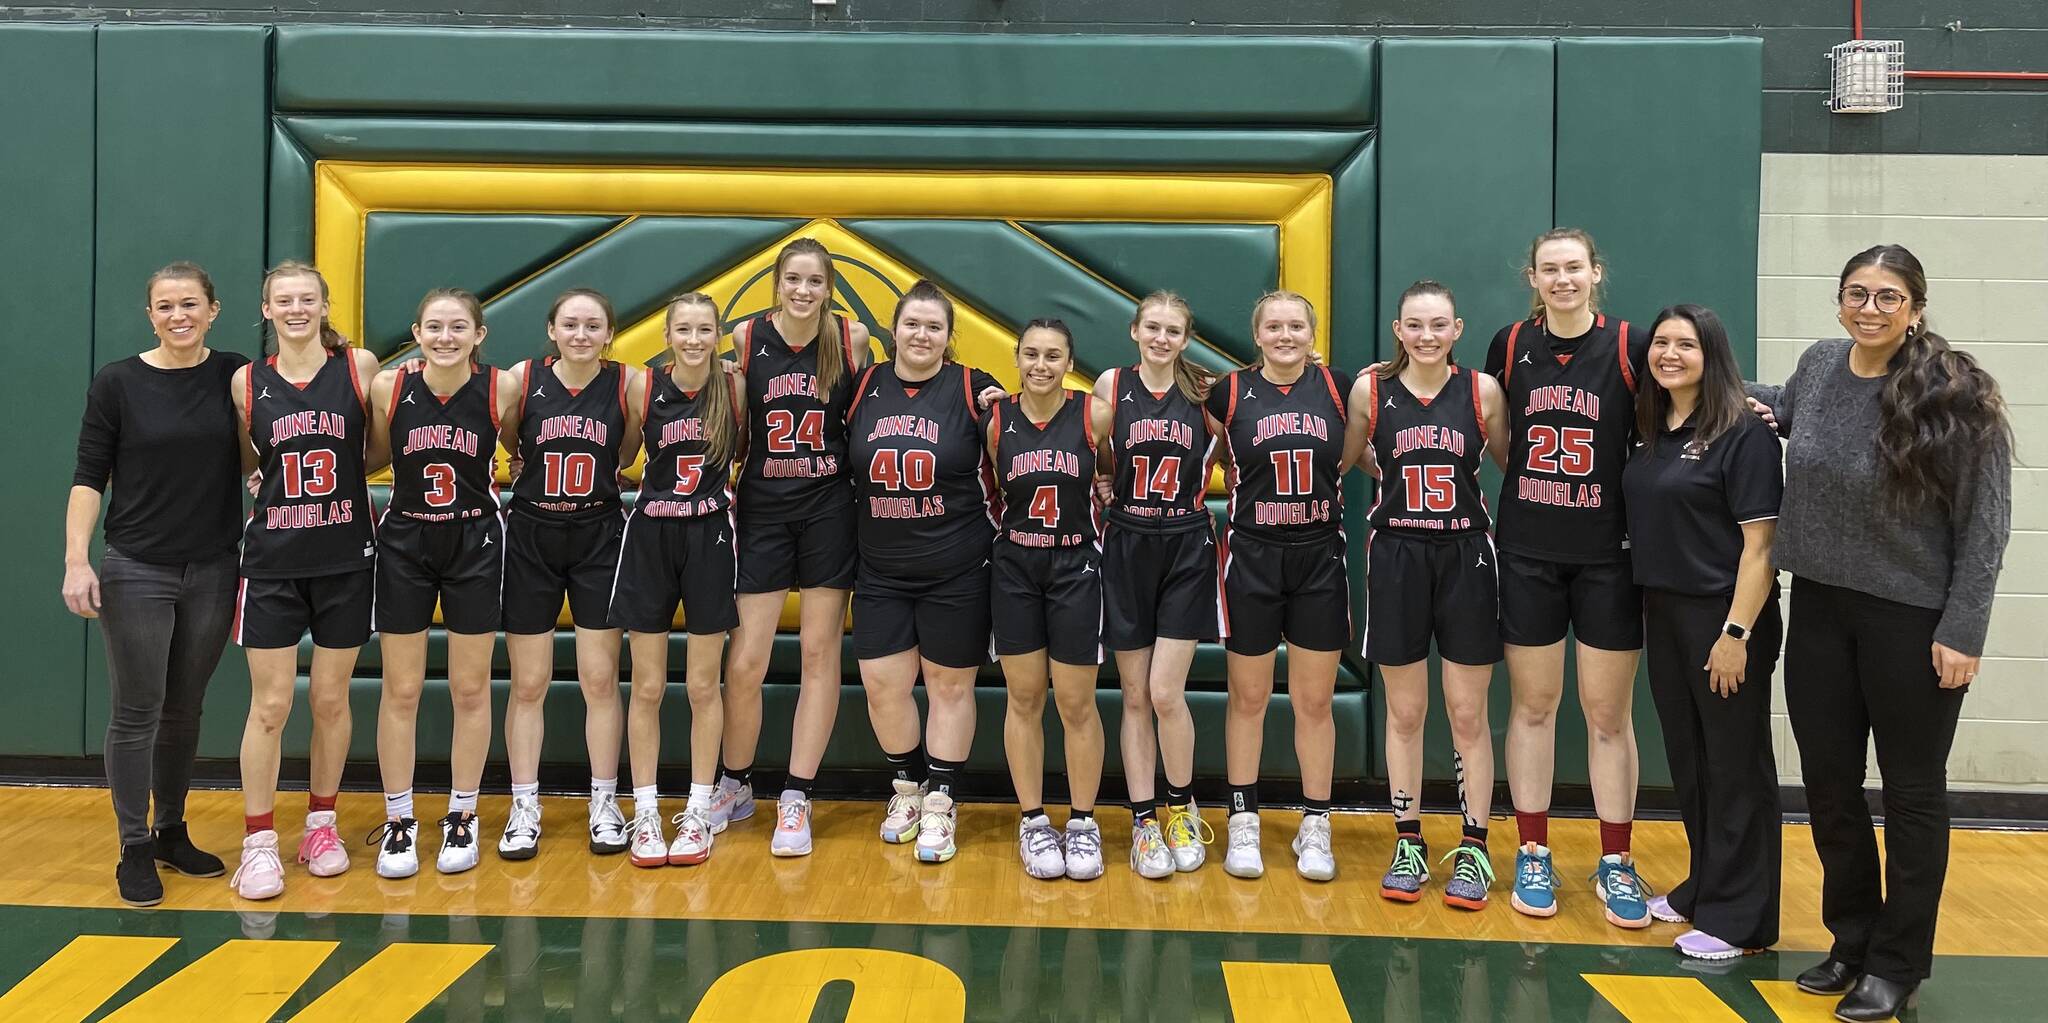 The 2022-2023 JDHS Crimson Bears team with coaches pose for a photo at ASAA state competition in Anchorage on Saturday before competing against TMHS in the championship game. JDHS finished in fourth place and TMHS went home in sixth. (Courtesy Photo / Tanya Nizich)